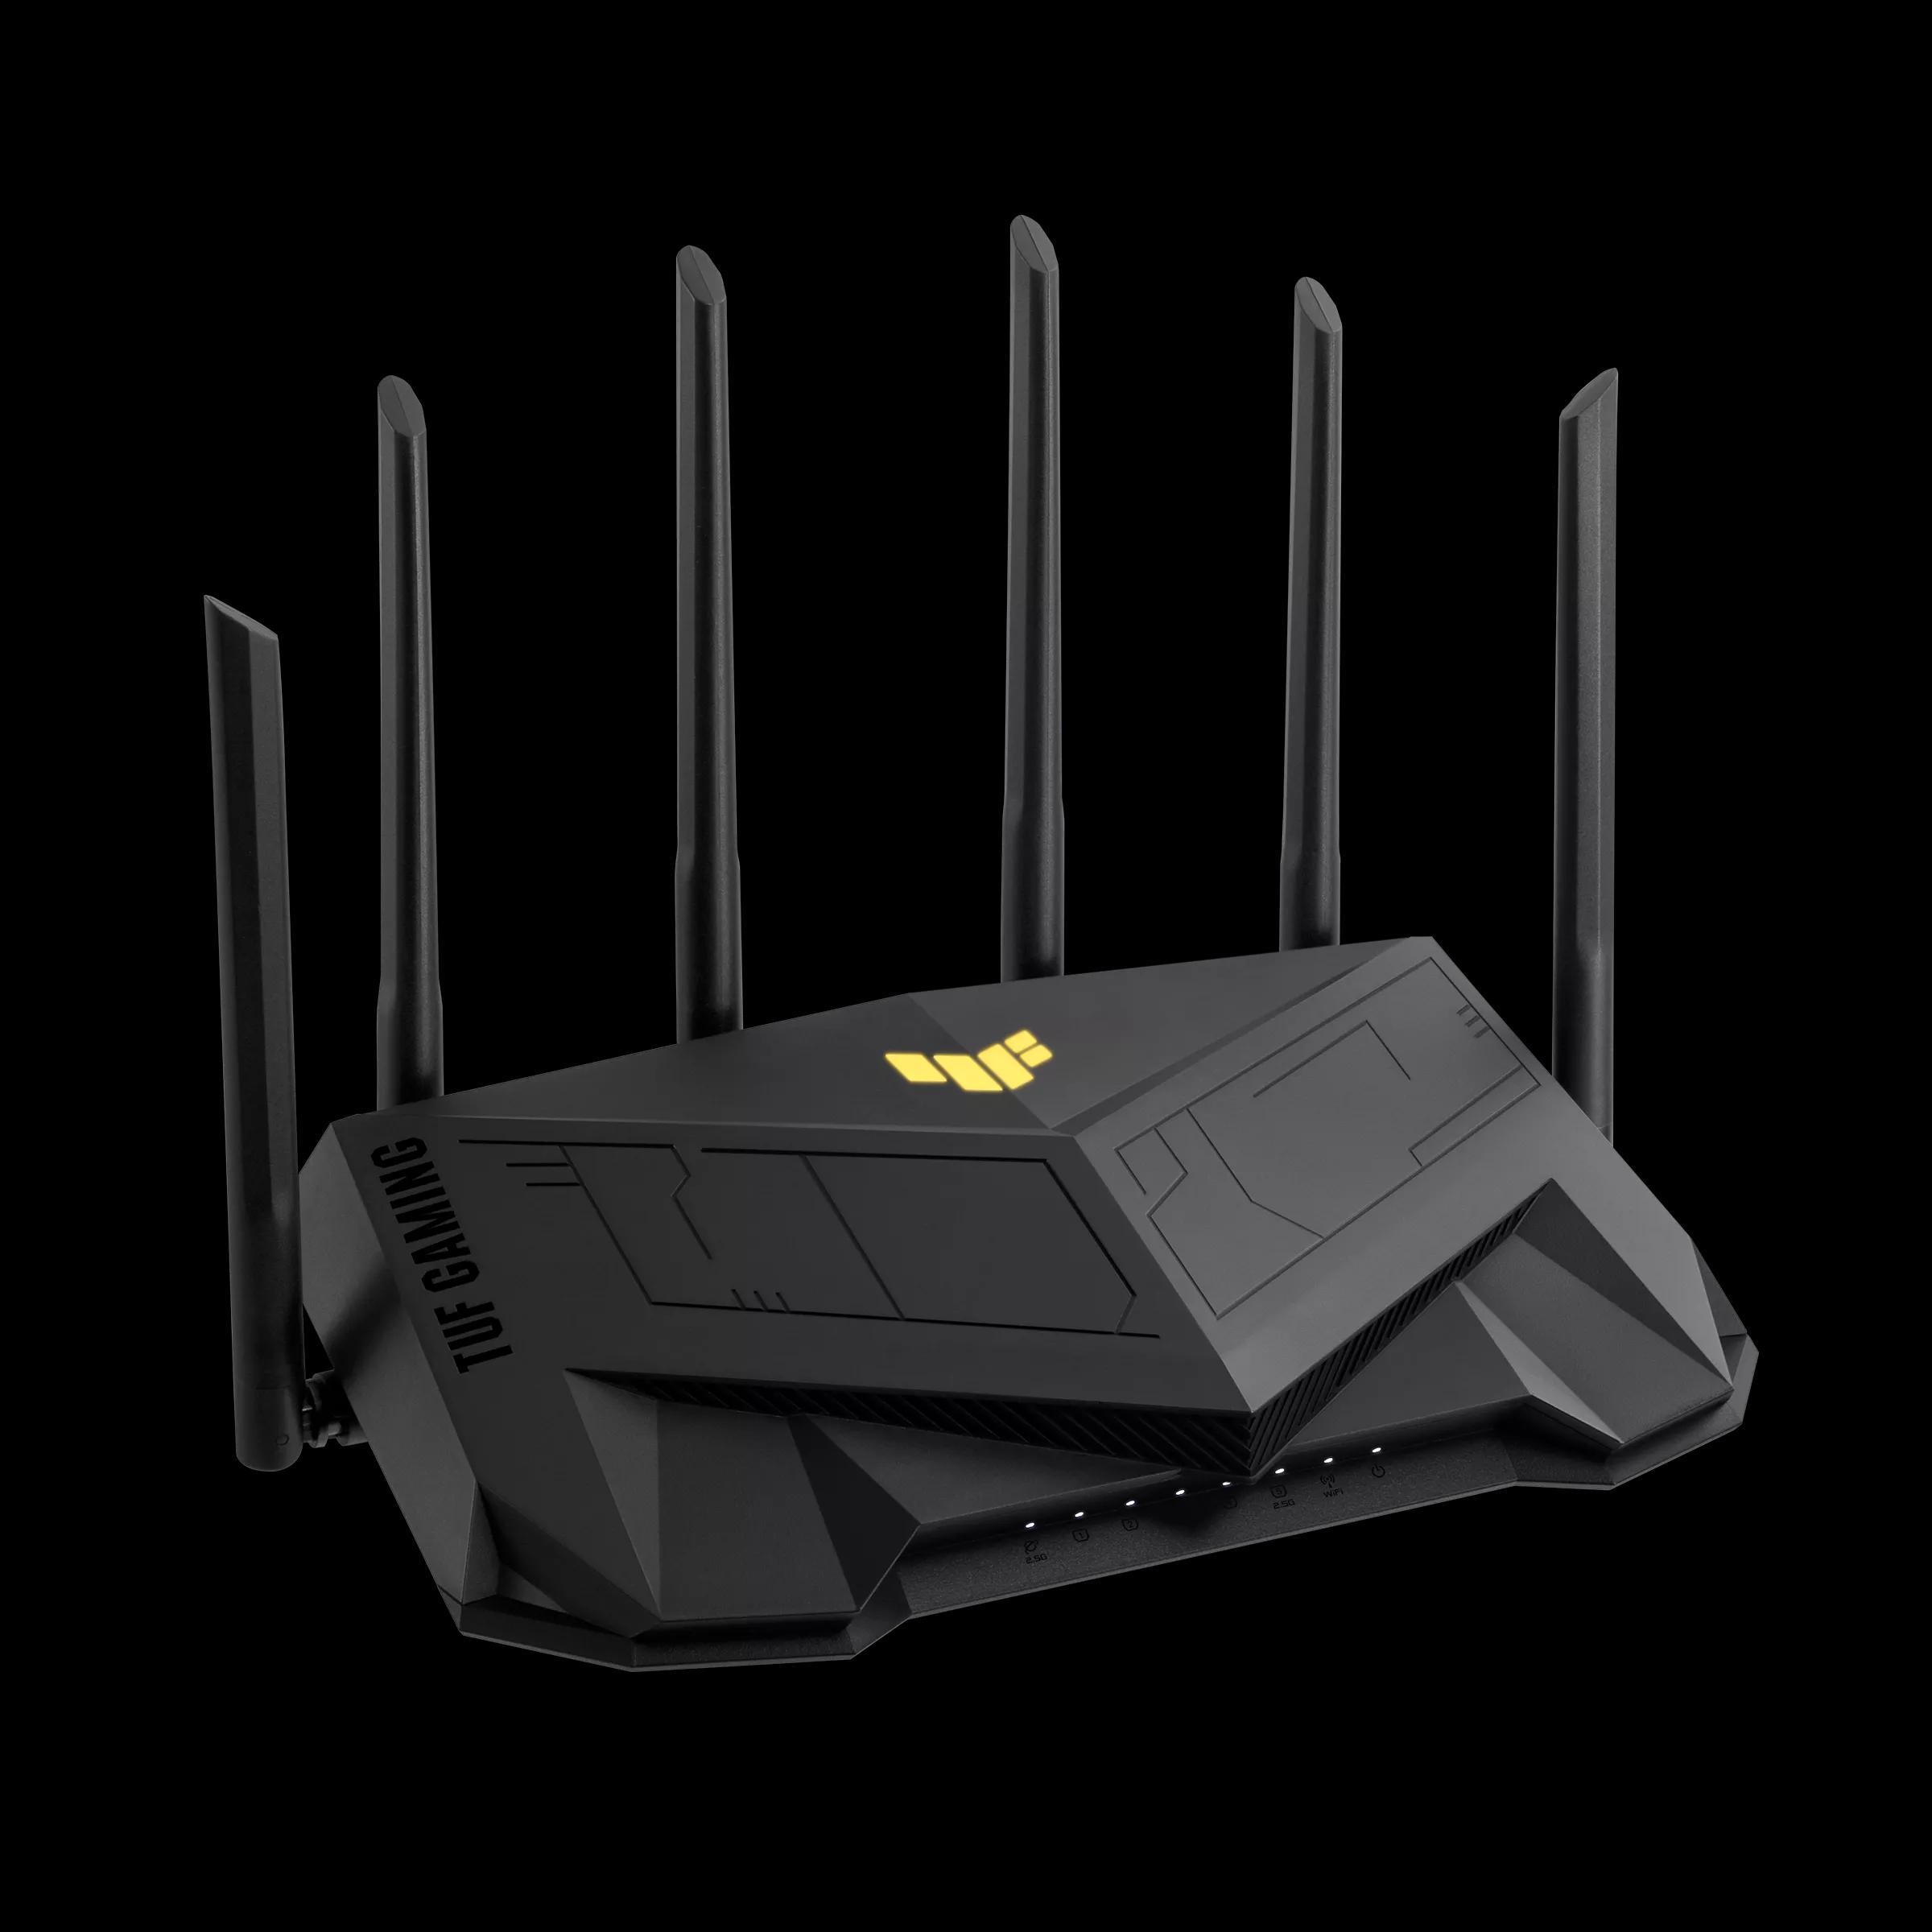 TUF GAMING AX6000 WIFI 6 ROUTER